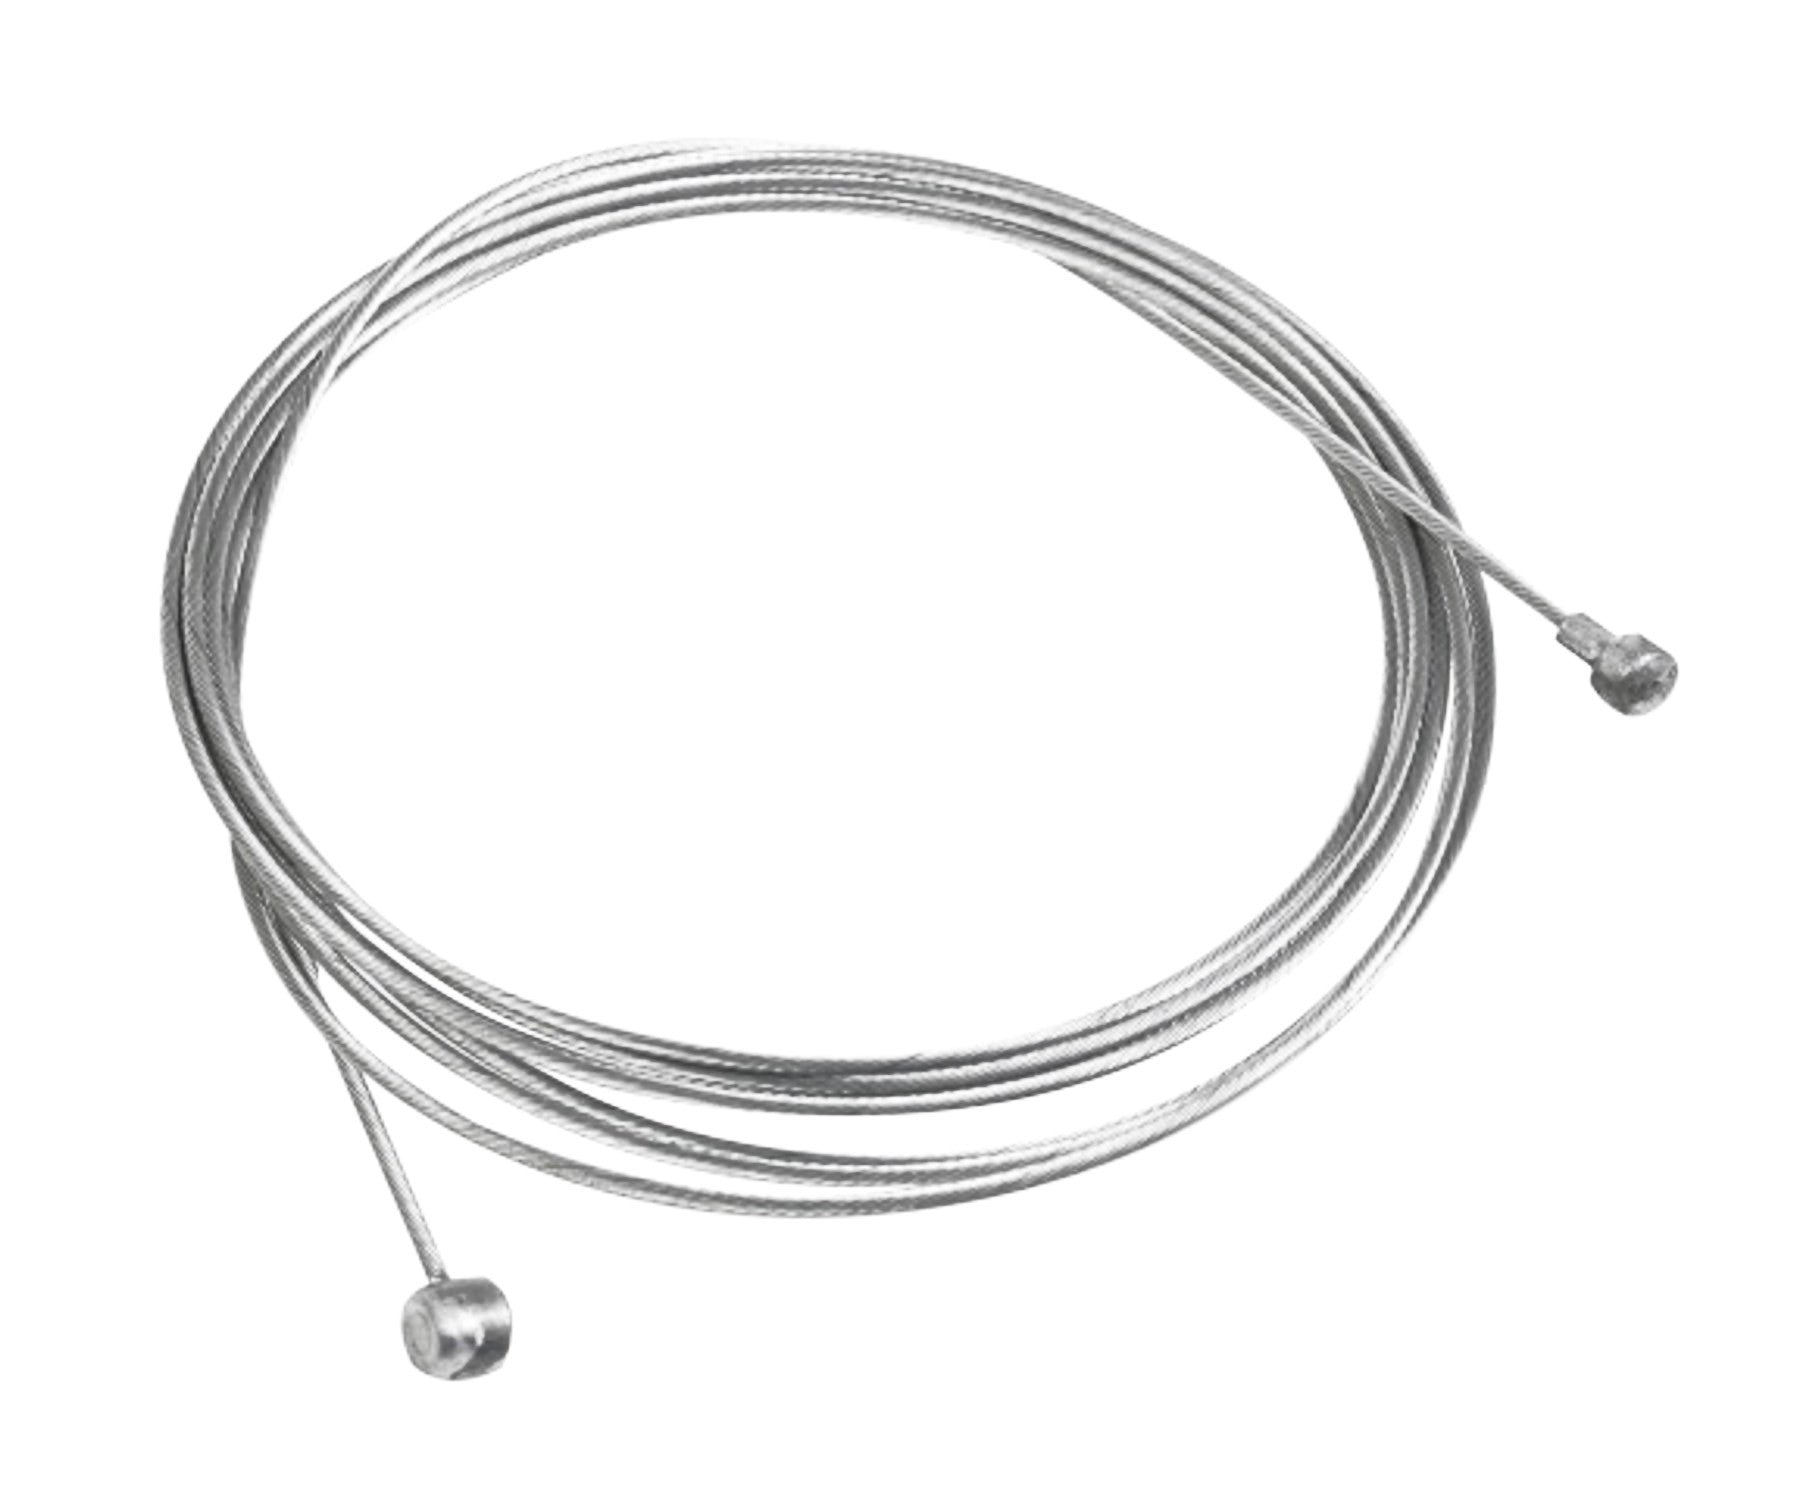 white bicycle brake cables